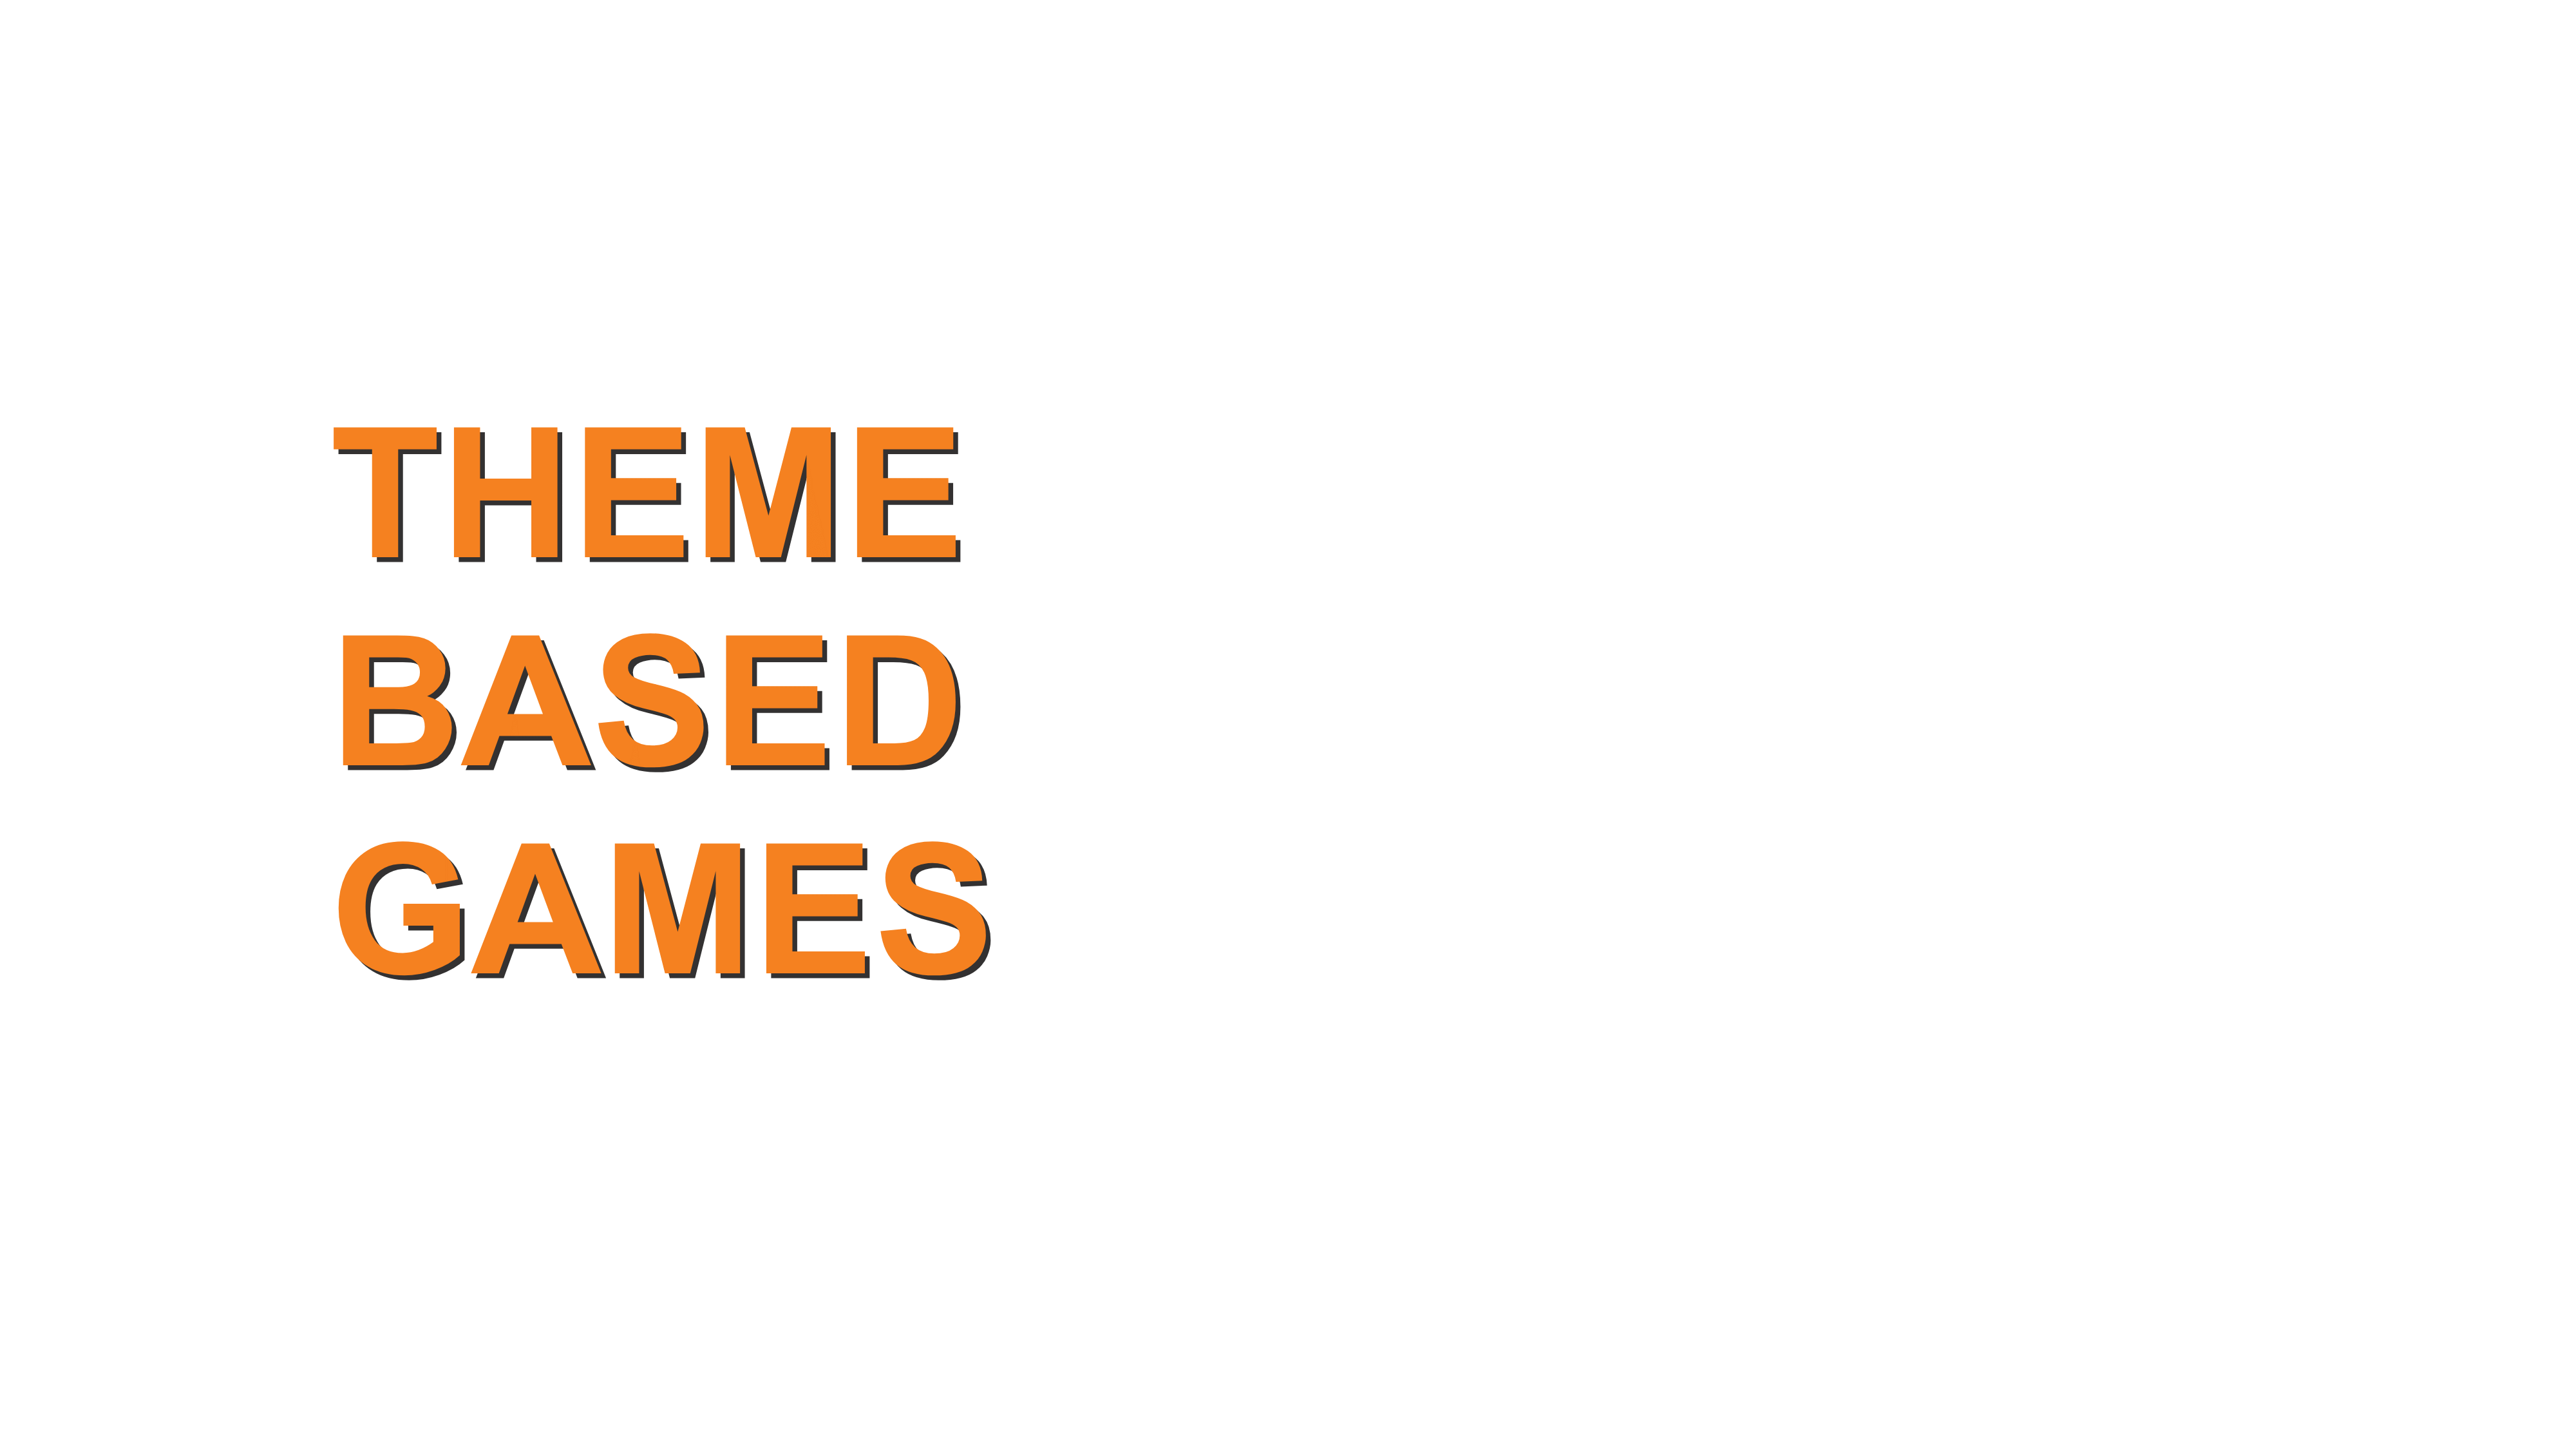 Theme Based Games Text